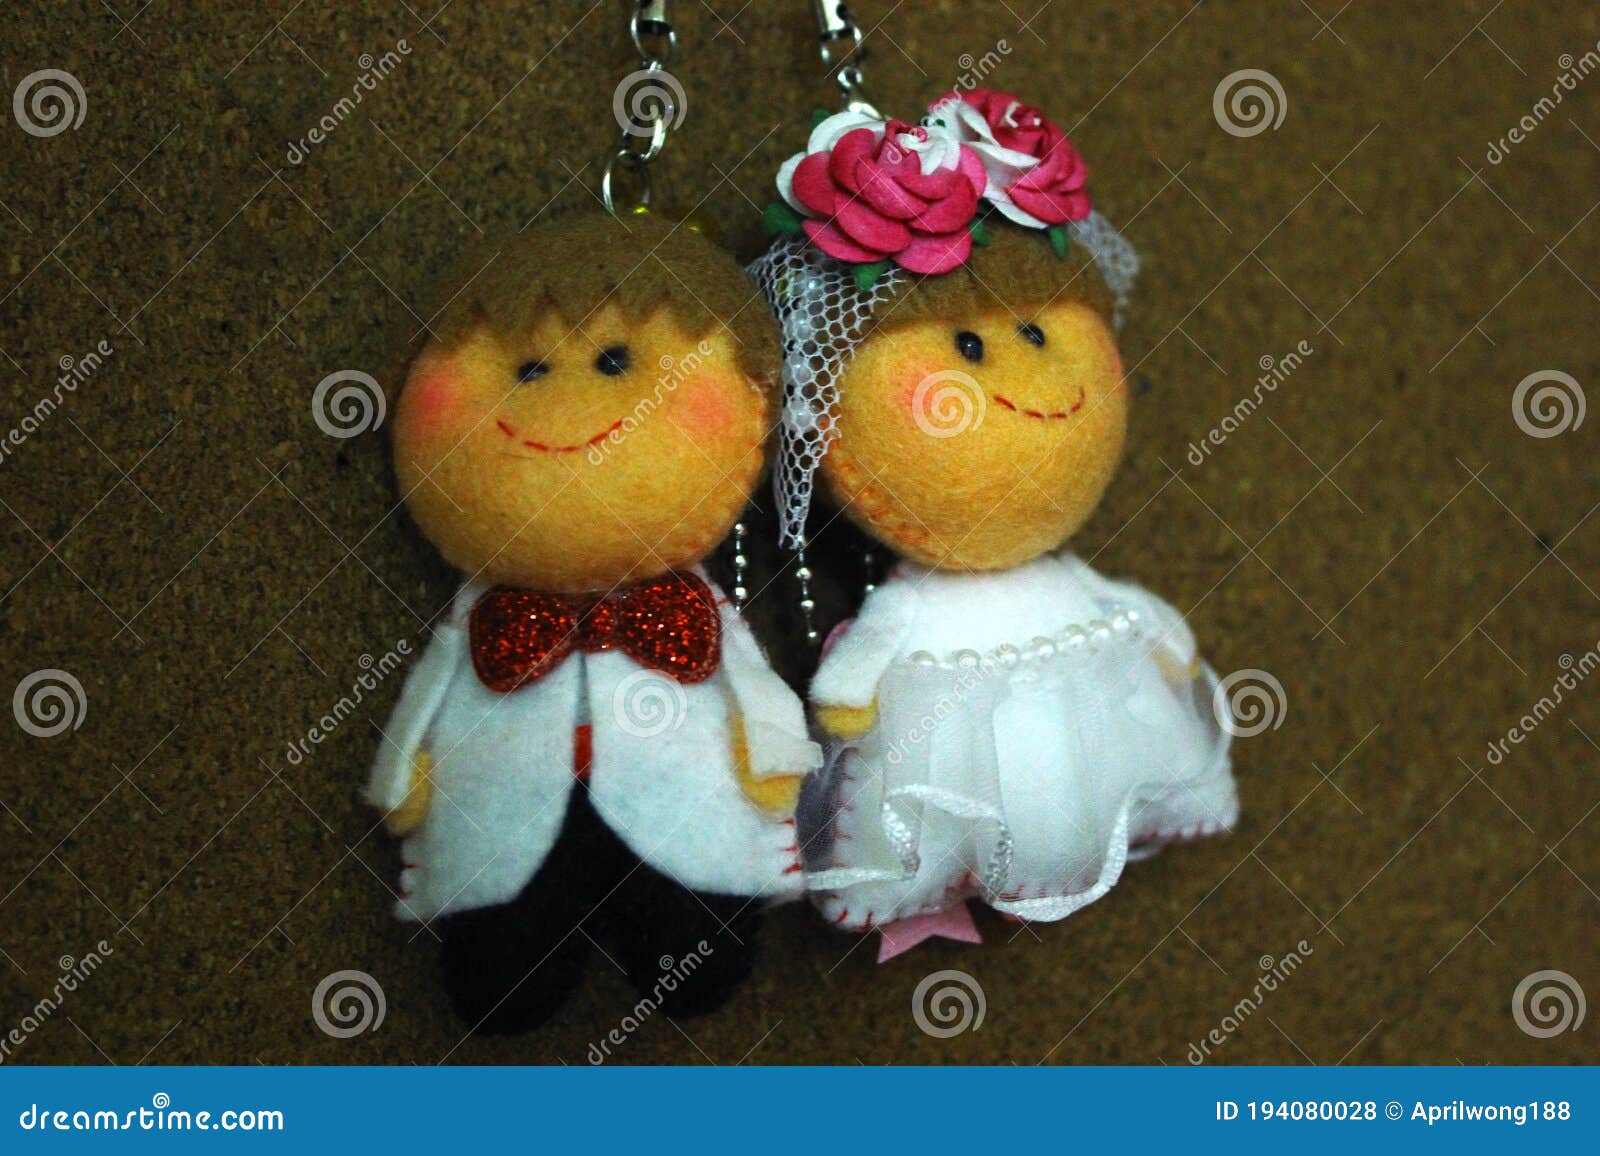 Cute Wedding Couple Doll on Brown Background Stock Photo - Image ...